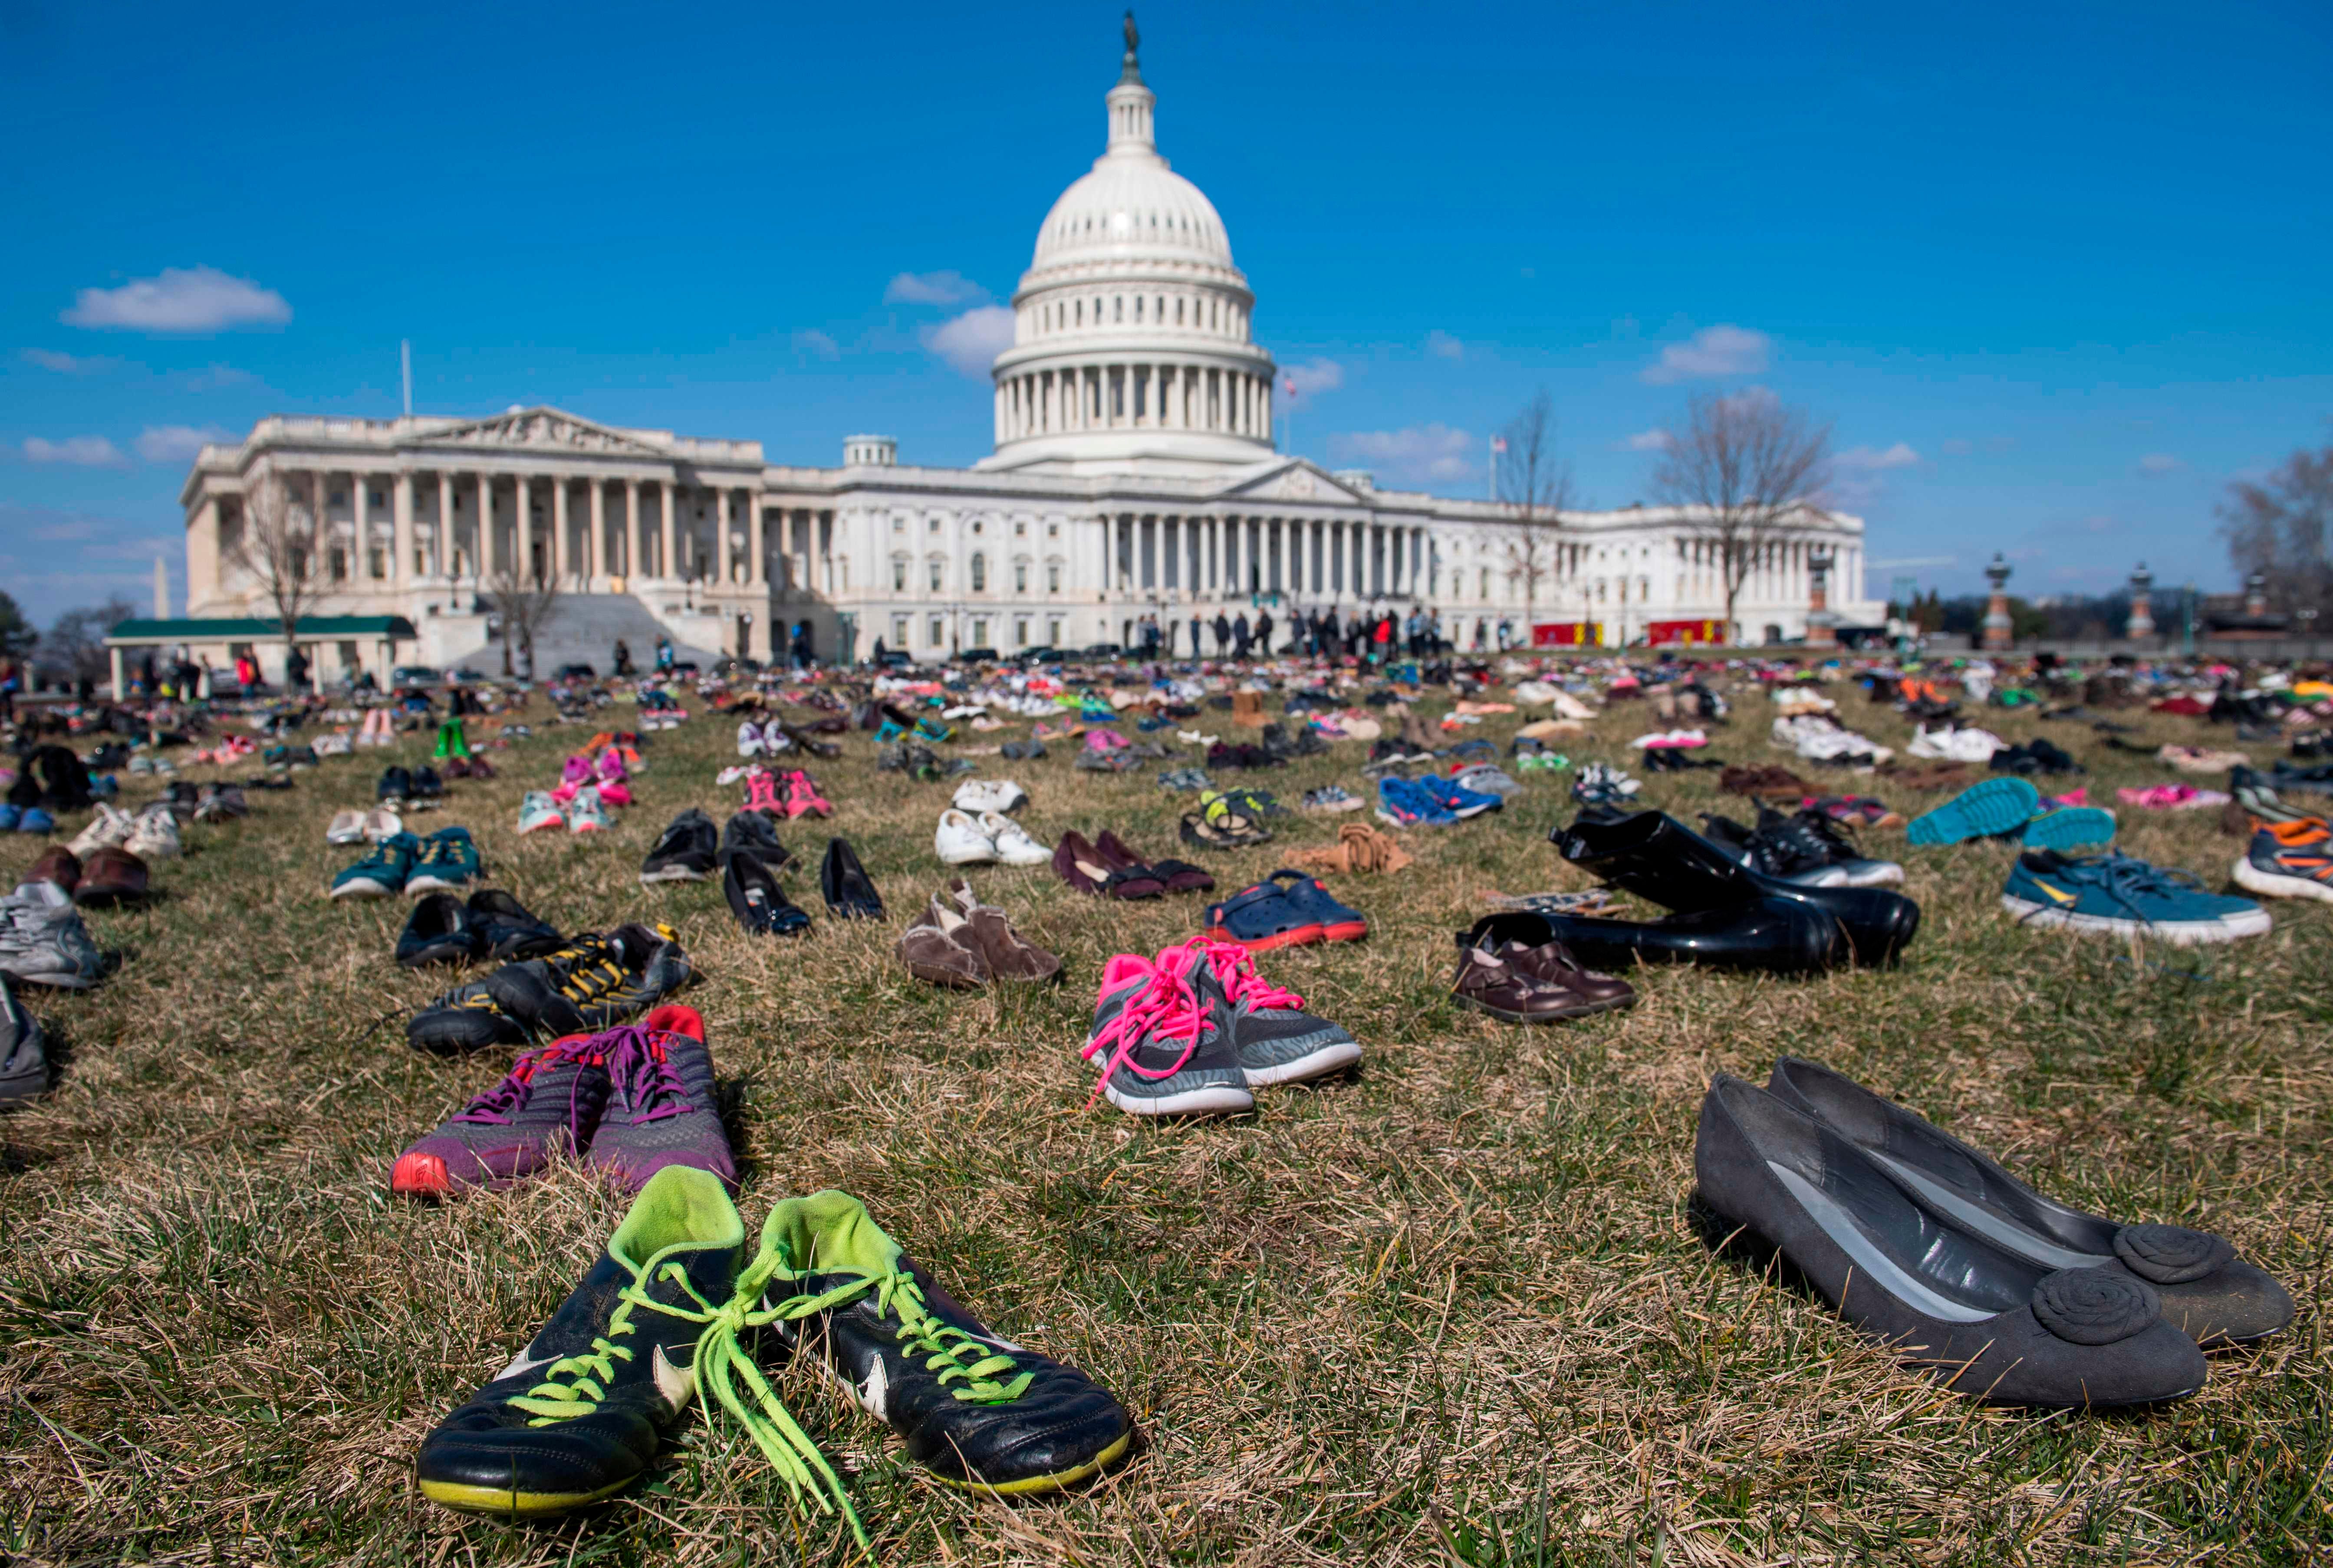 The lawn outside the US Capitol is covered with 7,000 pairs of empty shoes to memorialize the 7,000 children killed by gun violence since the Sandy Hook school shooting, in a display organized by the global advocacy group Avaaz, in Washington, DC, Ma